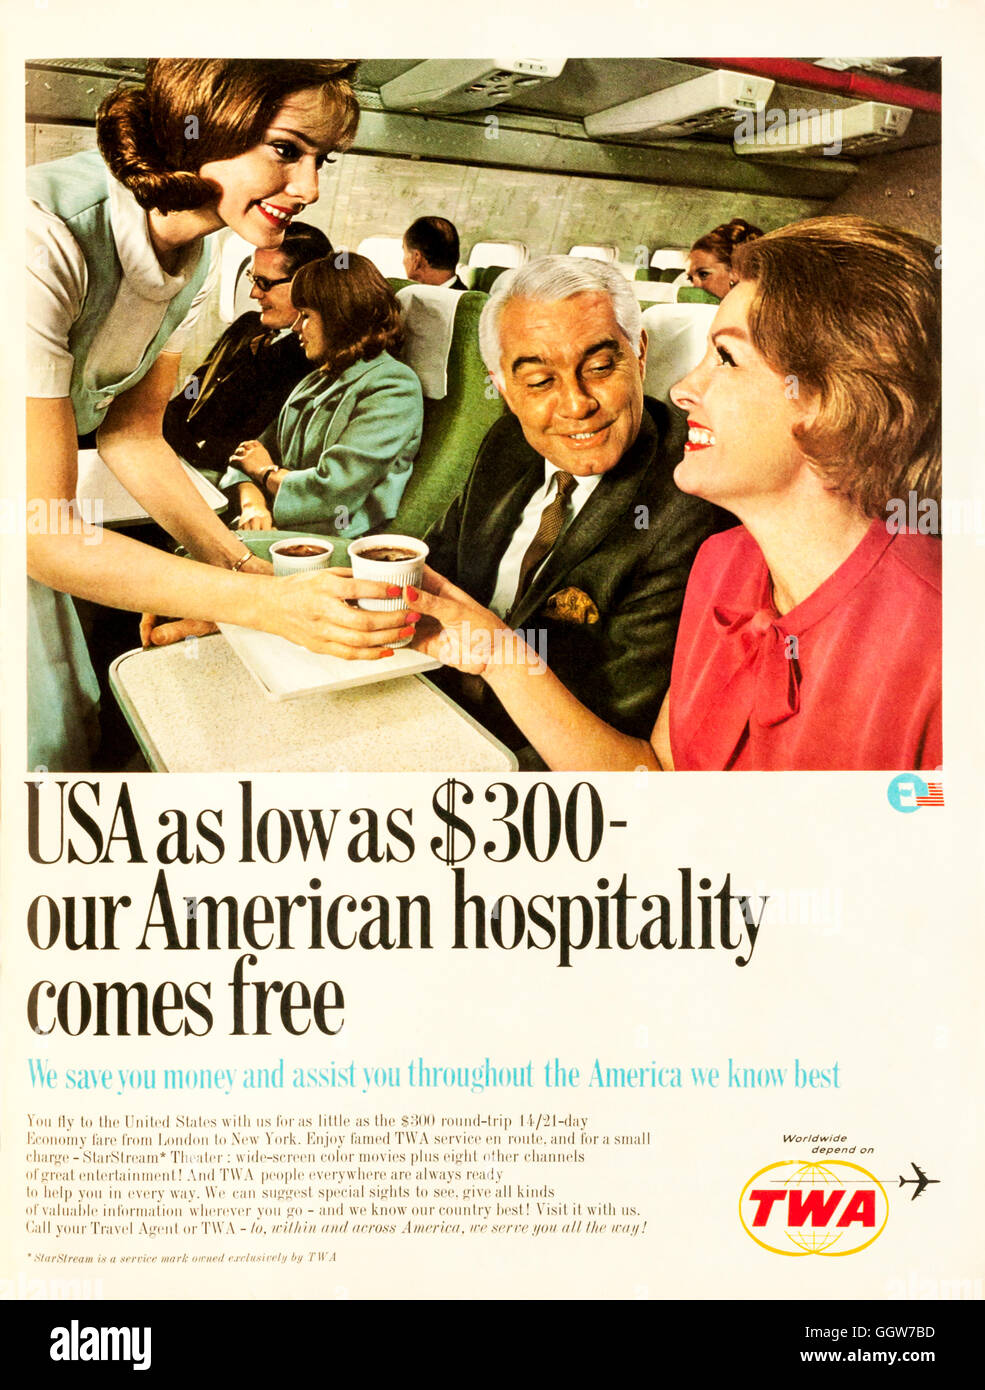 1960s magazine advertisement advertising the American airline TWA or Trans World Airlines. Stock Photo